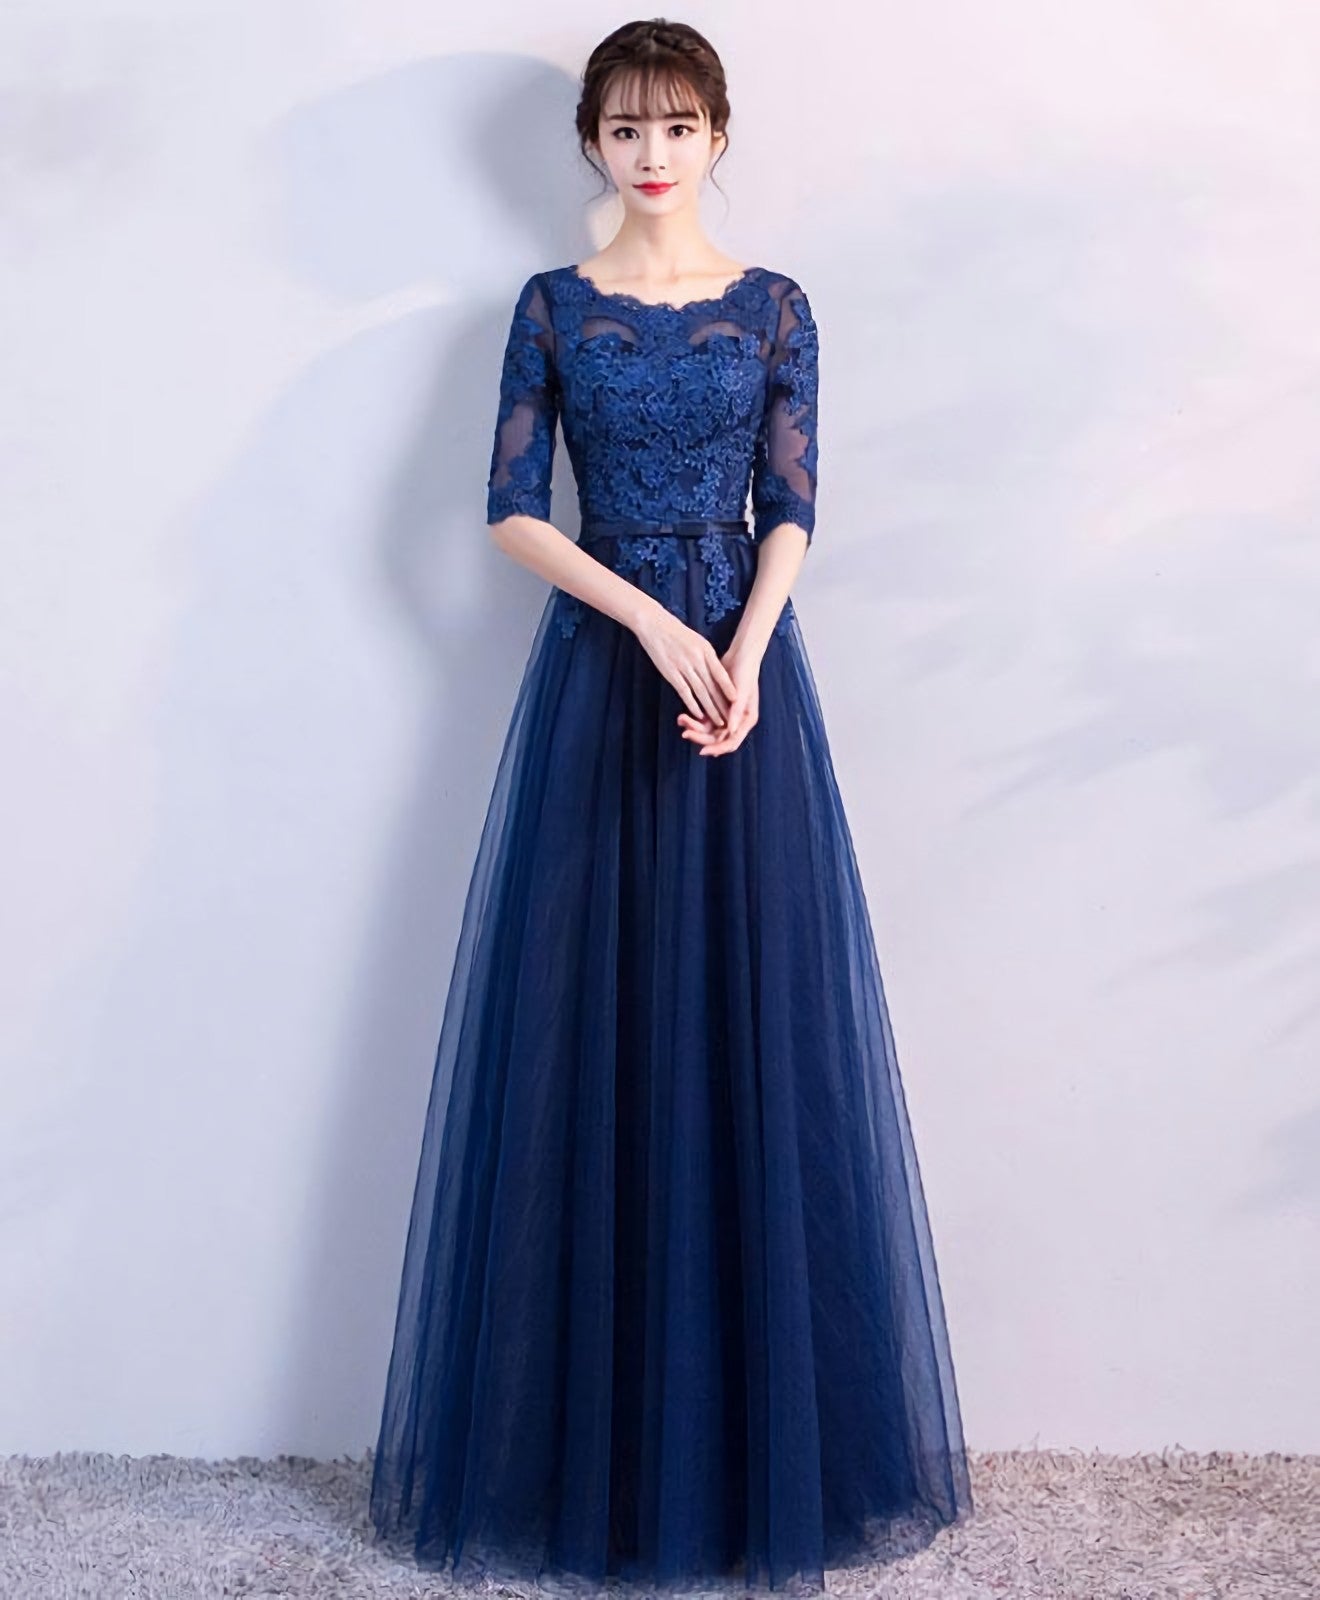 Blue Tulle Lace Long Corset Prom Dress, Lace Evening Dress outfit, Prom Dresses Designer